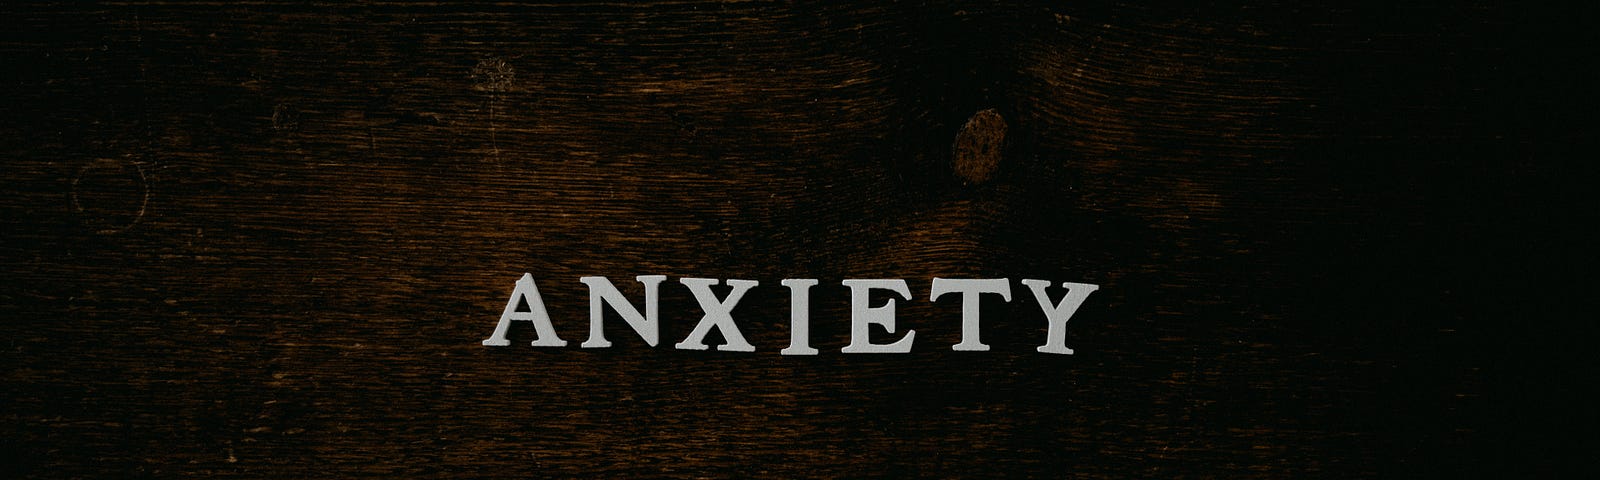 ‘Anxiety’ written in white letters on a wooden surface